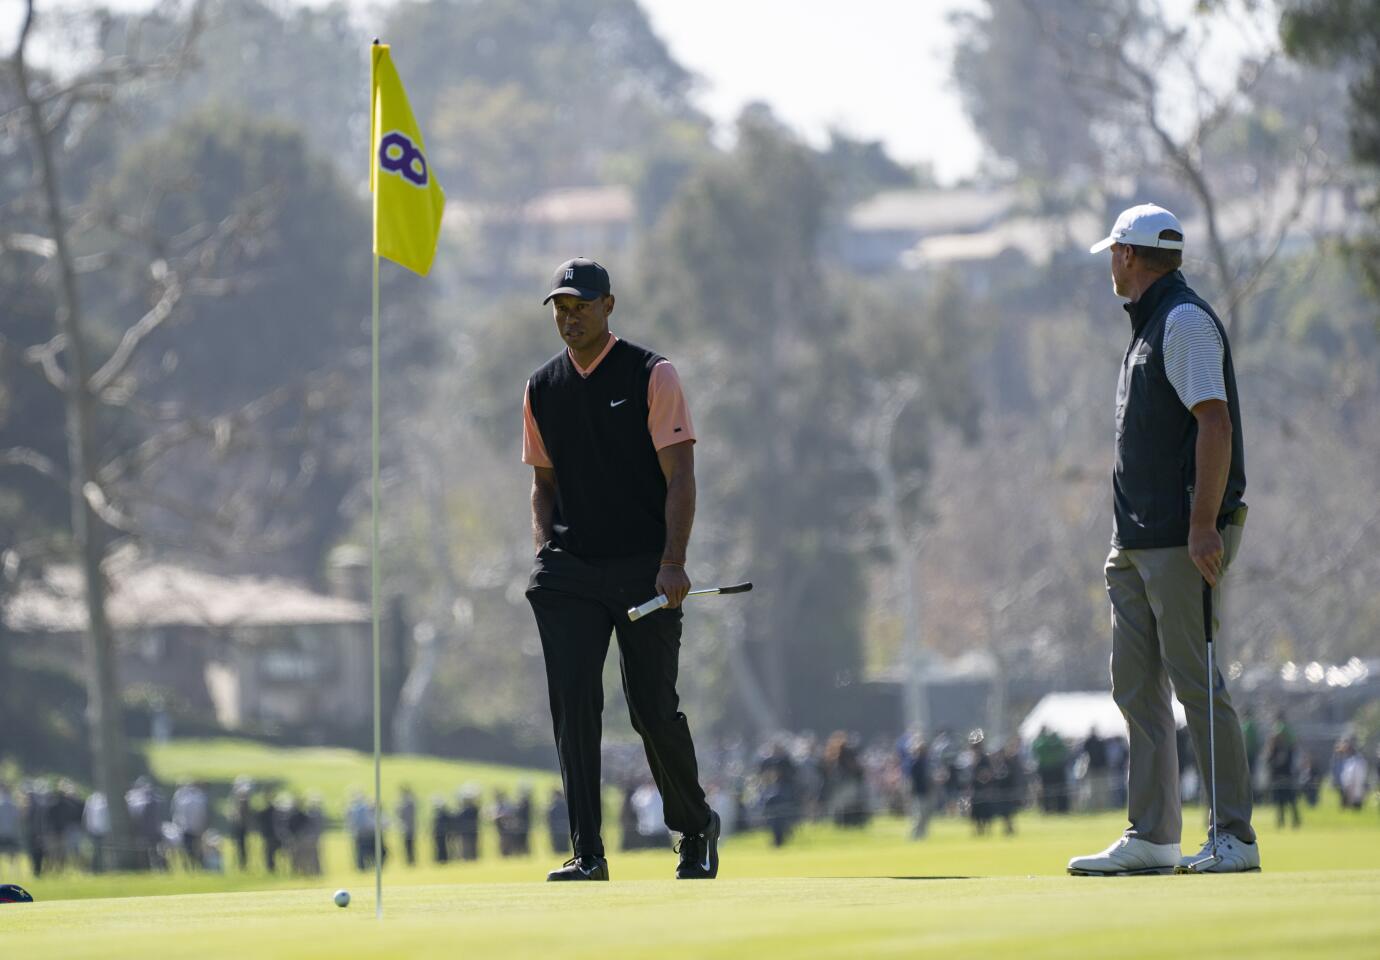 Tiger Woods looks at the flag depicting Kobe Bryant's No. 8 as he walks to mark his ball on the eighth green during the first round of the Genesis Invitational at Riviera Country Club on Feb. 13, 2020.